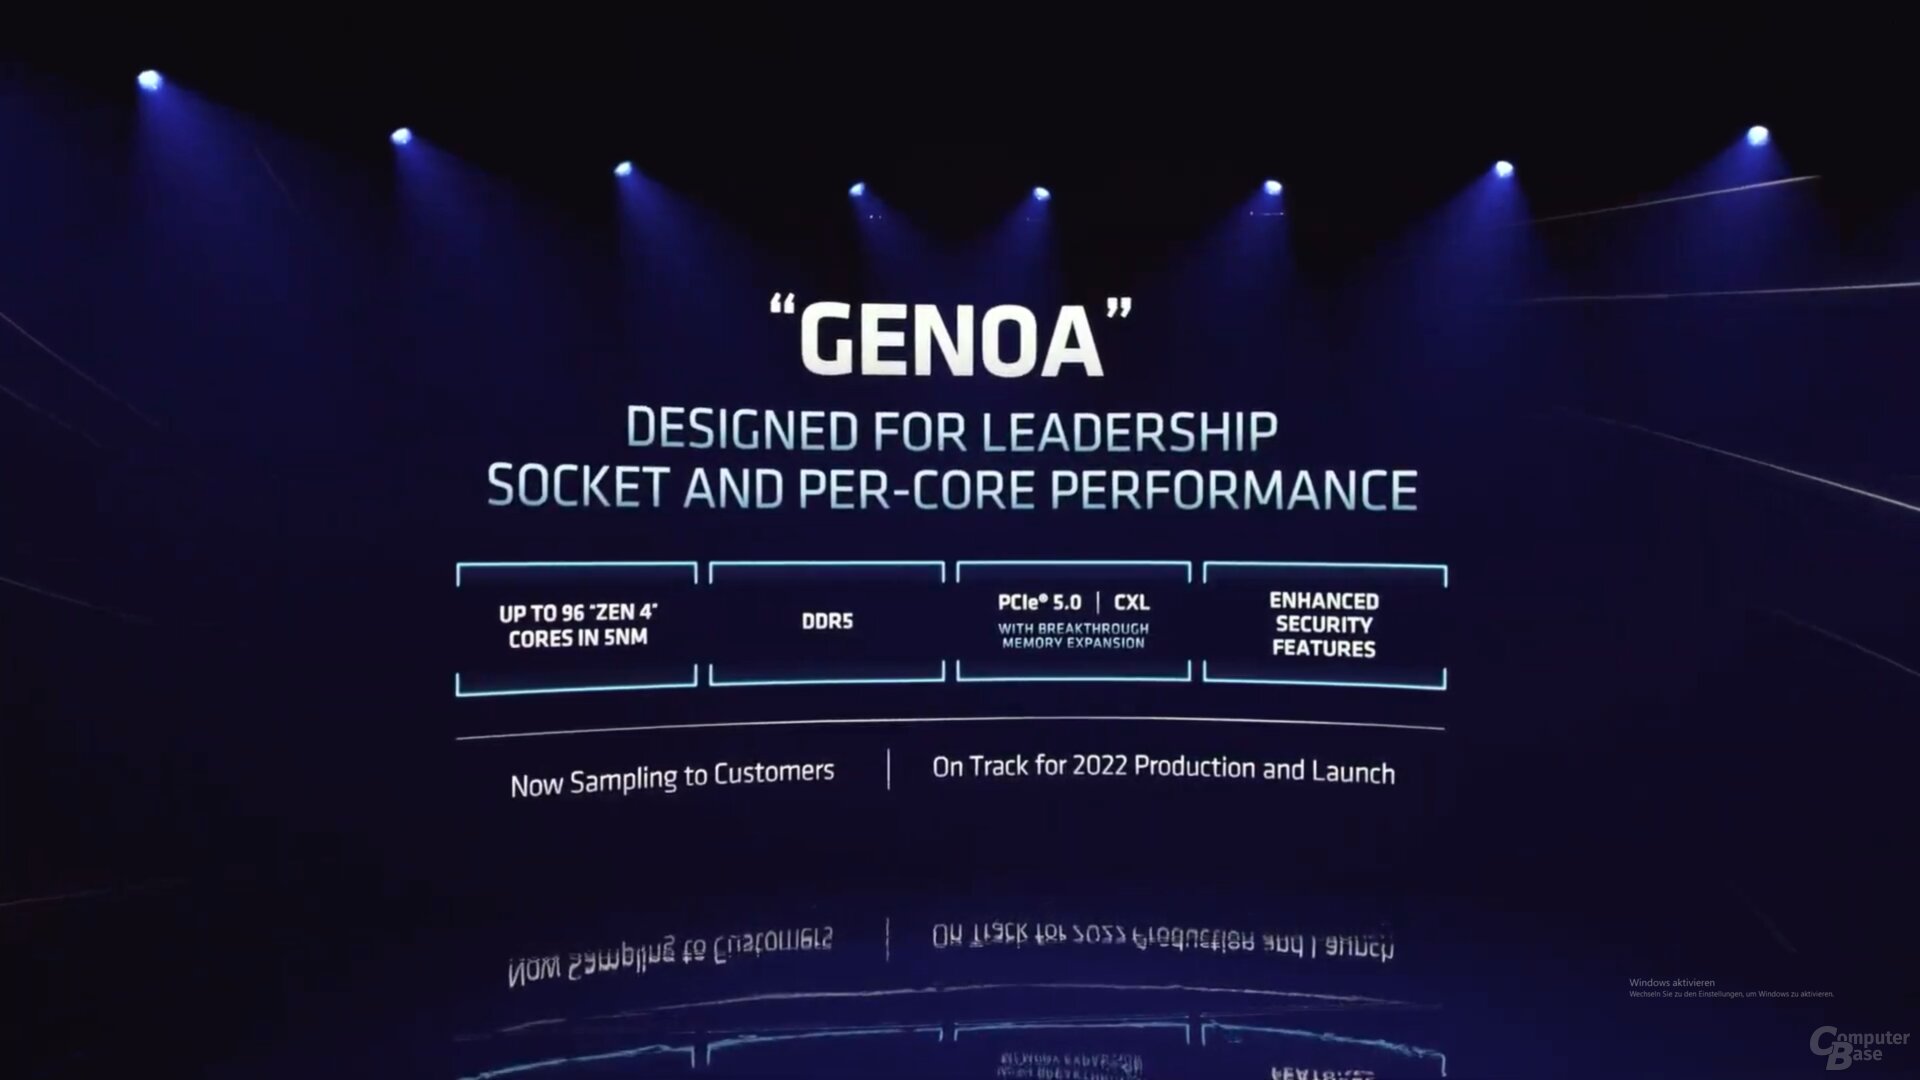 AMD Epyc with Genoa will be the first 5 nm Zen 4 product and will release up to 96 cores in 2022